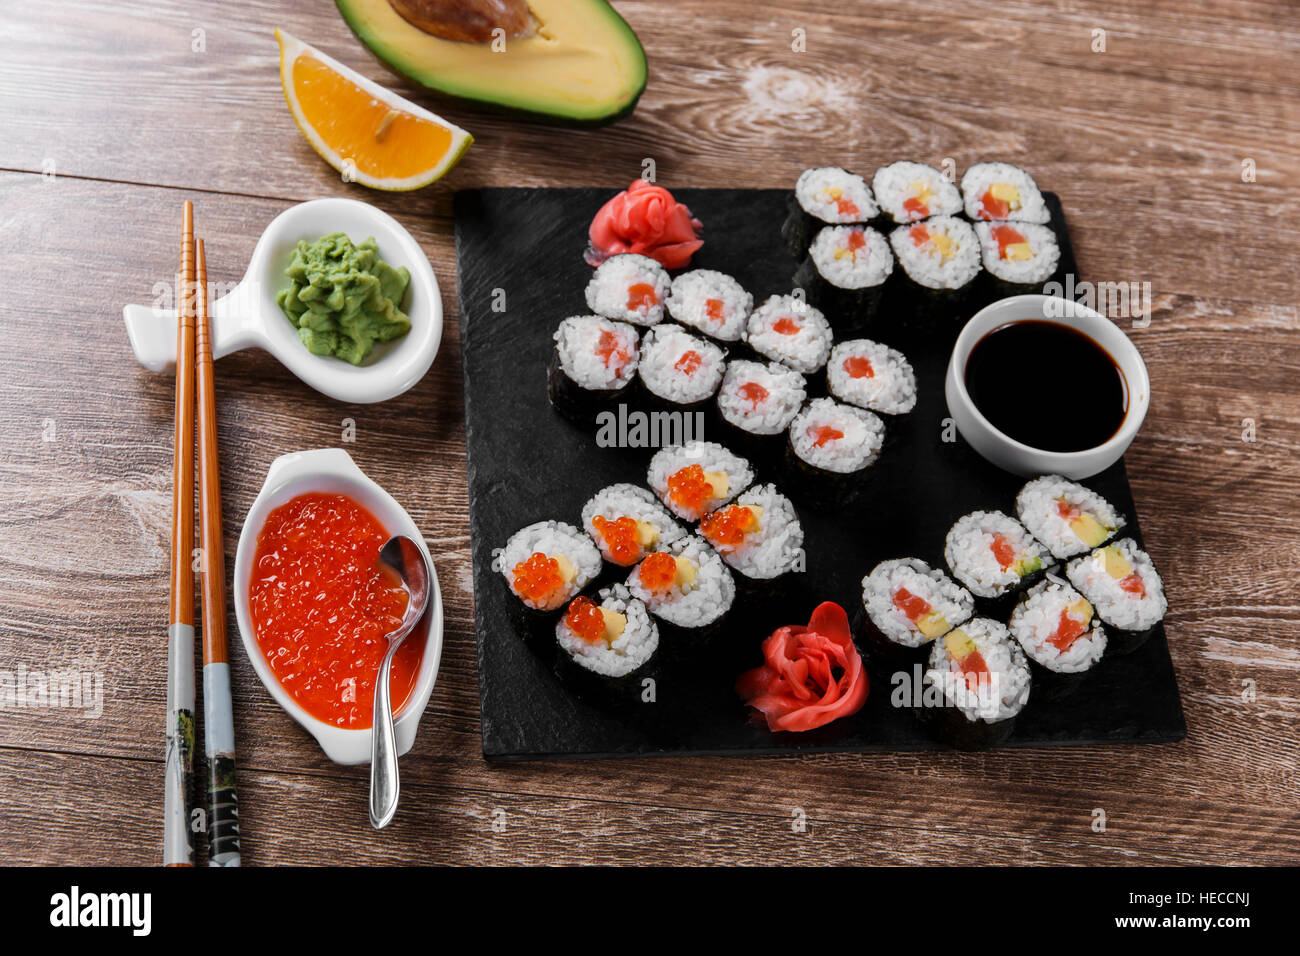 sushi rolls and ingredients served on a wooden surface Stock Photo